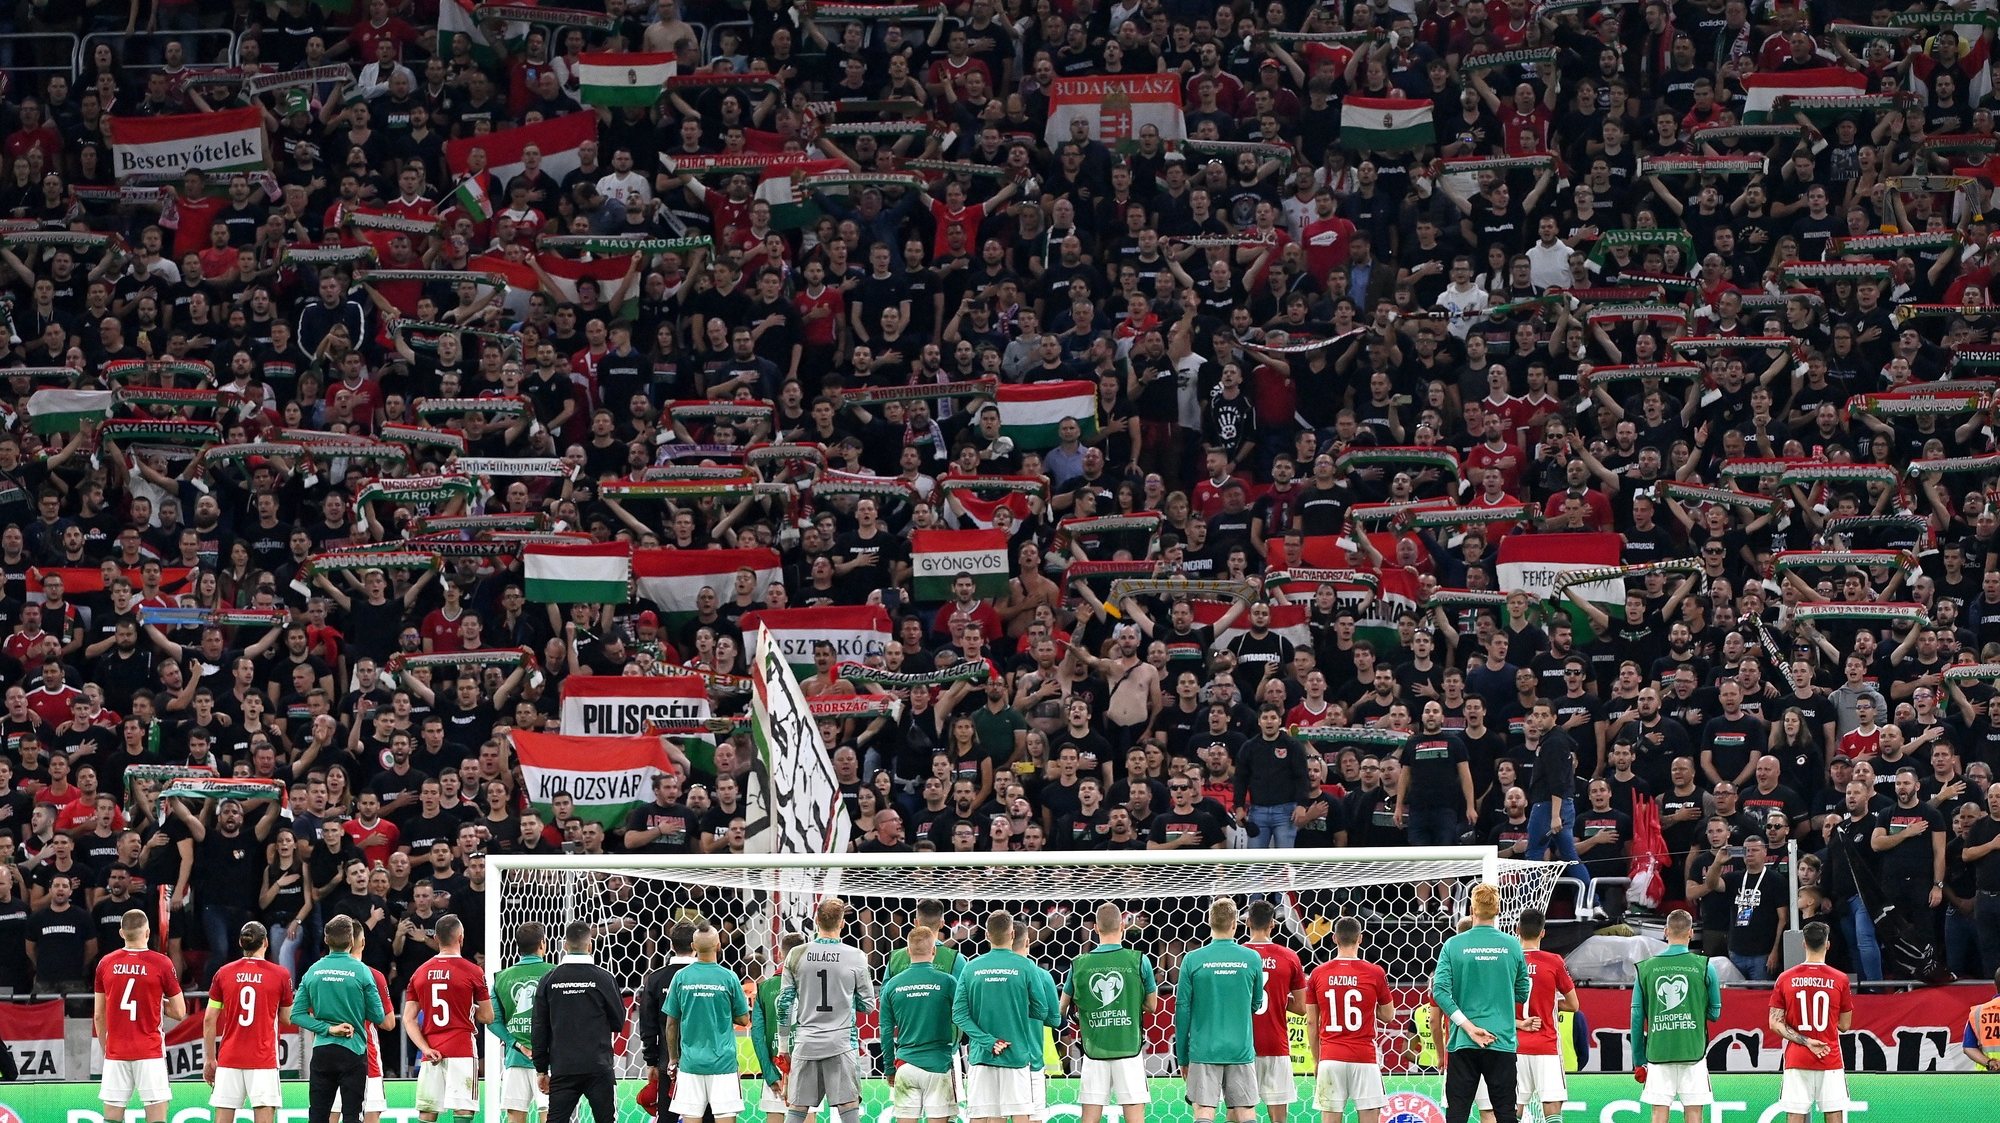 epa09444070 Players of Hungary greet their fans after they lost 4-0 to England in the FIFA World Cup Qatar 2022 qualifying Group I soccer match Hungary vs England at Puskas Ferenc Arena in Budapest, Hungary, 02 September 2021.  EPA/Tibor Illyes HUNGARY OUT